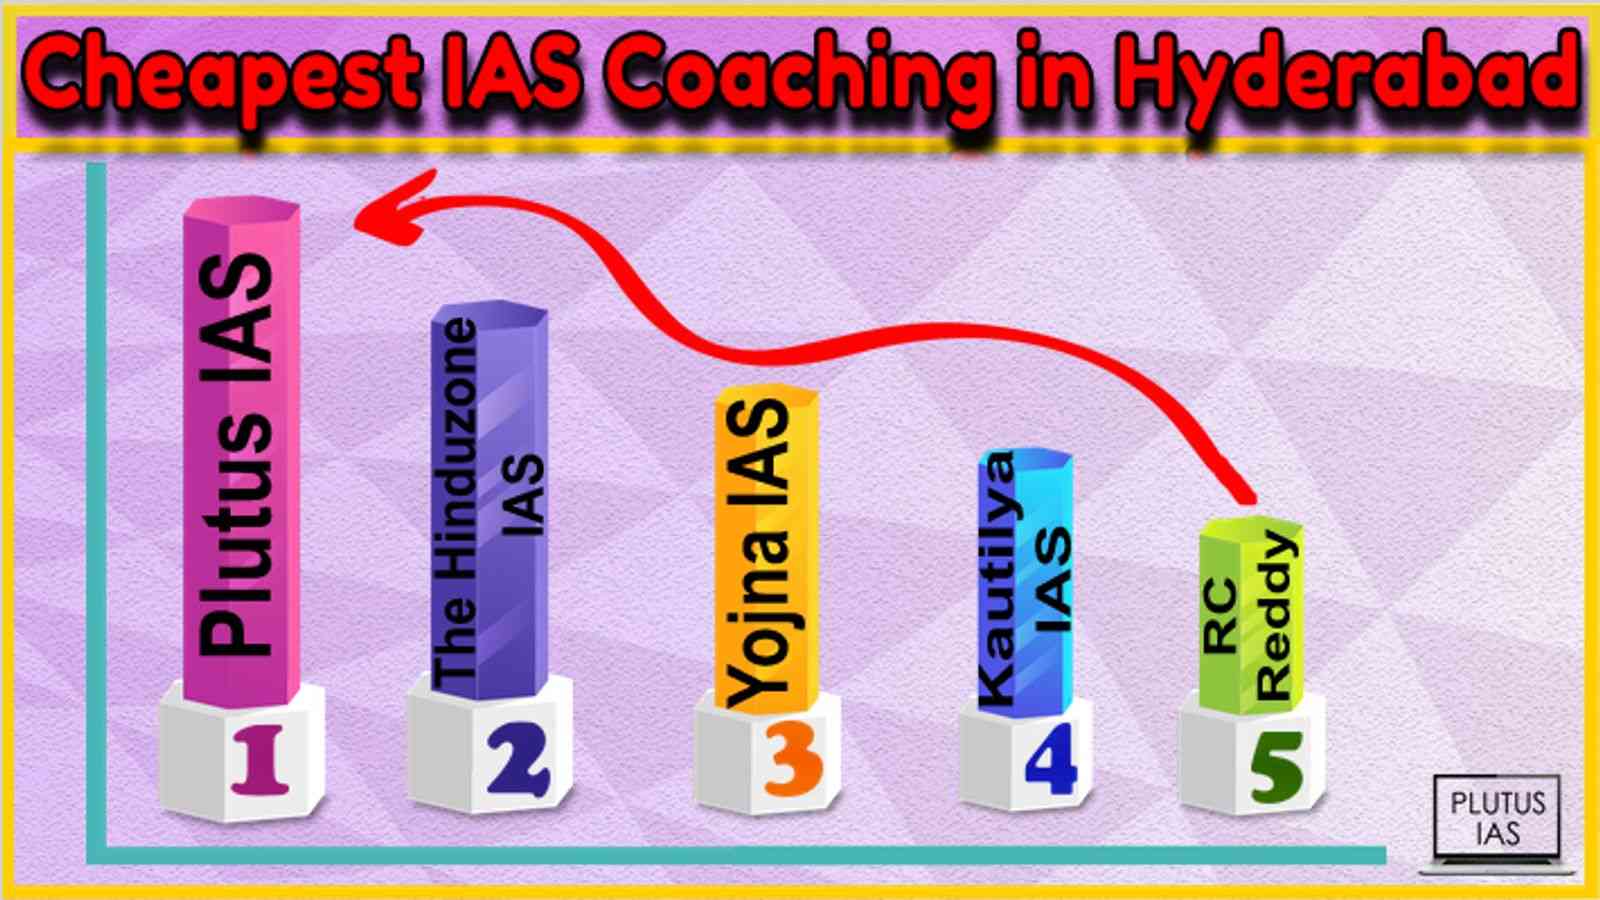 Cheapest IAS Coaching in Hyderabad